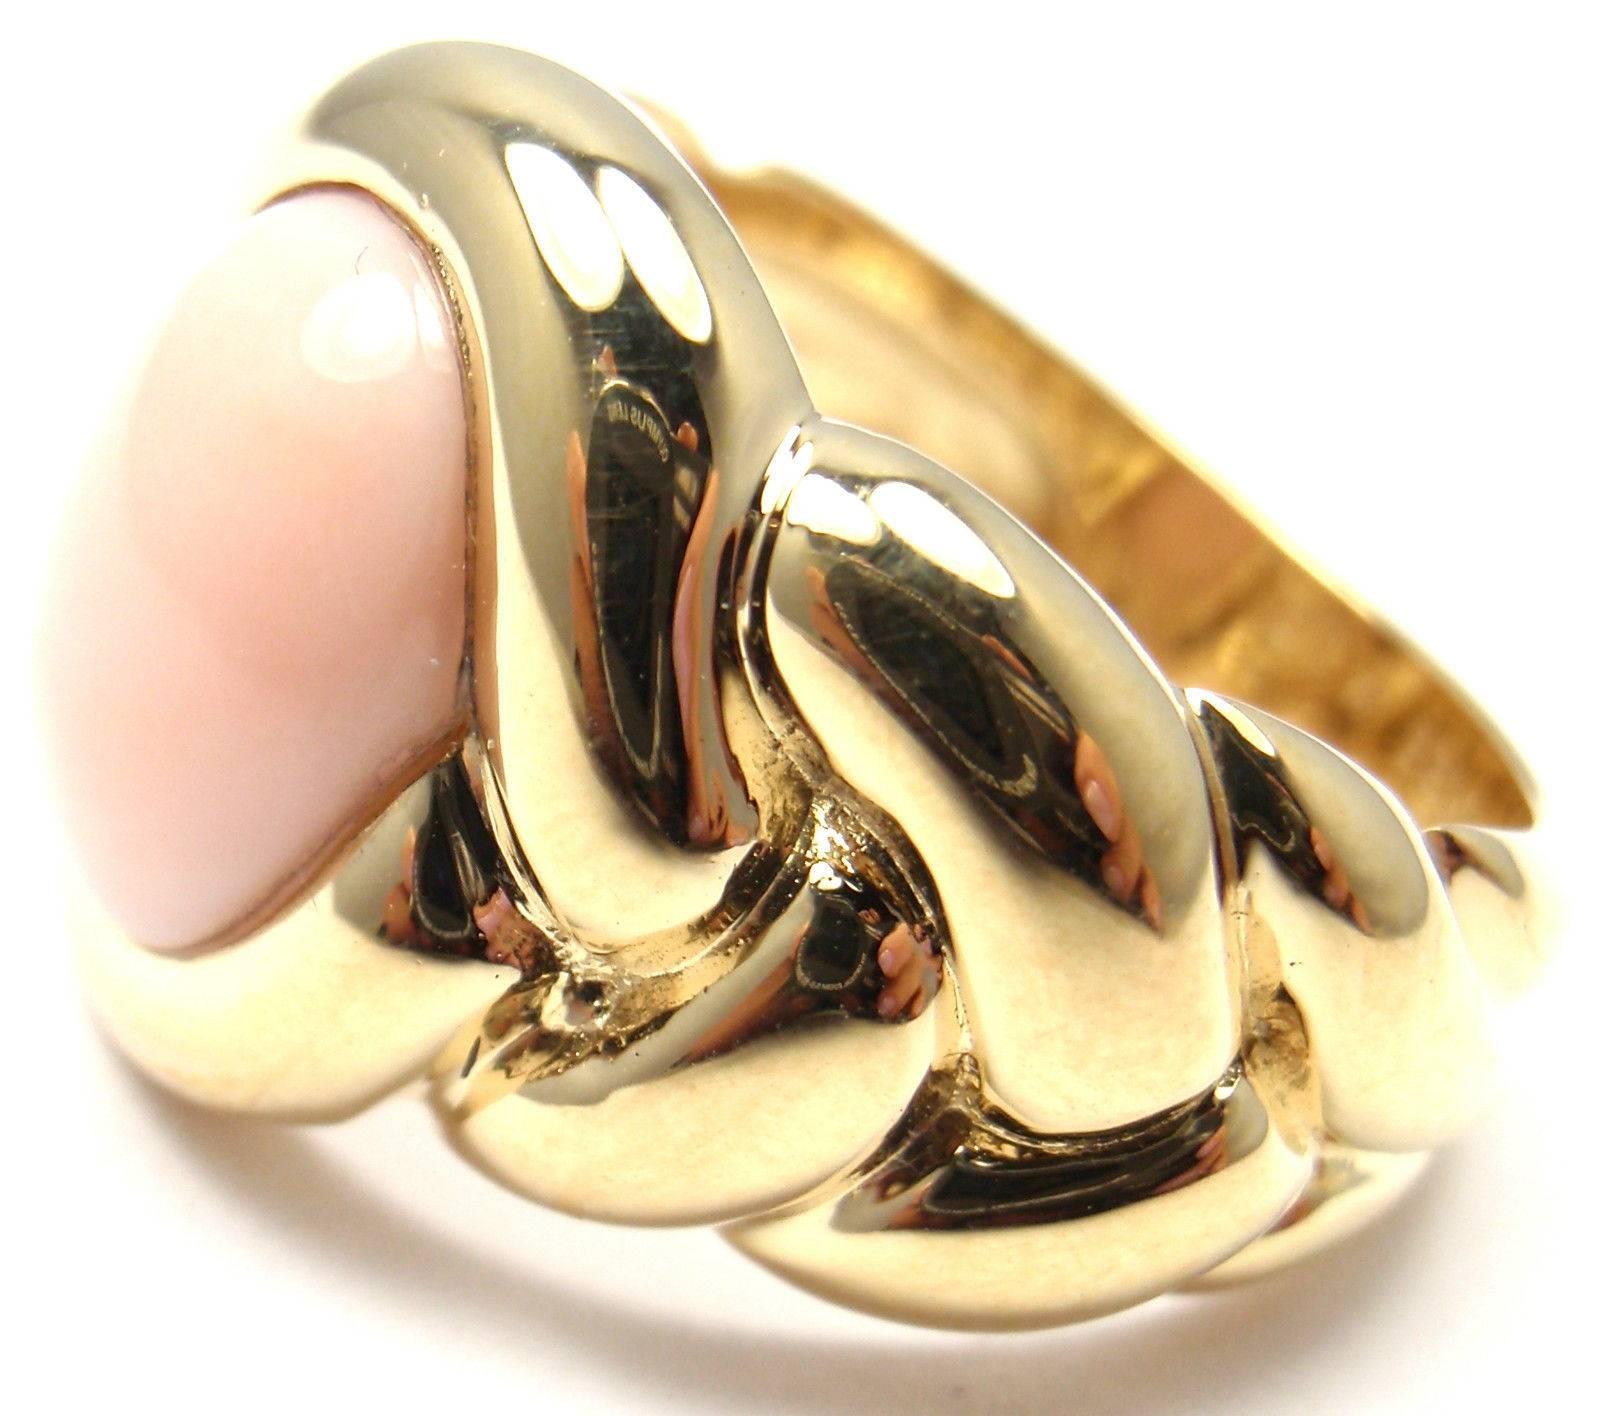 18k Yellow Gold Angel Skin Coral Braided Band Ring by Van Cleef & Arpels. 
With 1 oval angel skin coral 10mm x 8mm

Details: 
Ring Size: 5.5 
Width: 14mm 
Weight: 9.2 grams 
Stamped Hallmarks:  18KT VCA 90 B5368K10

*Free Shipping within